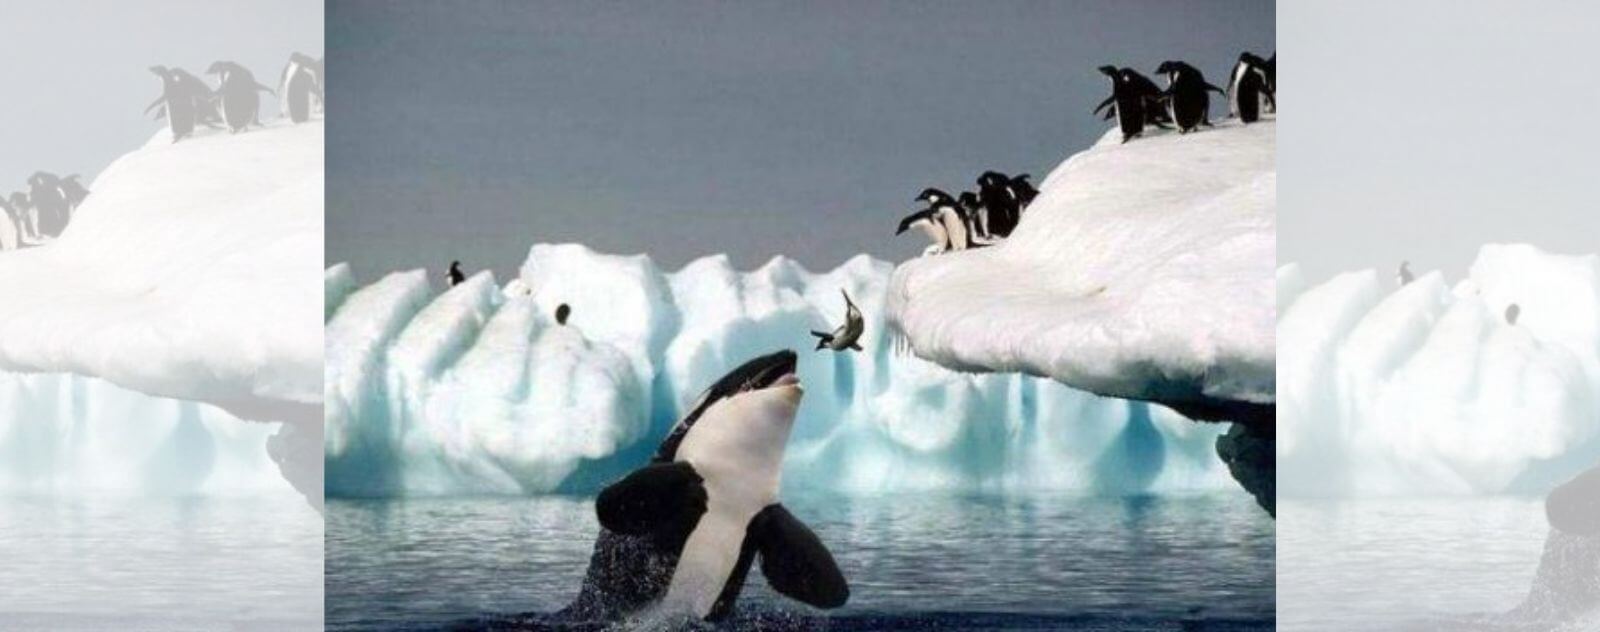 Orca Hunting and Eating Penguins Jumping from the Ice in Antarctica